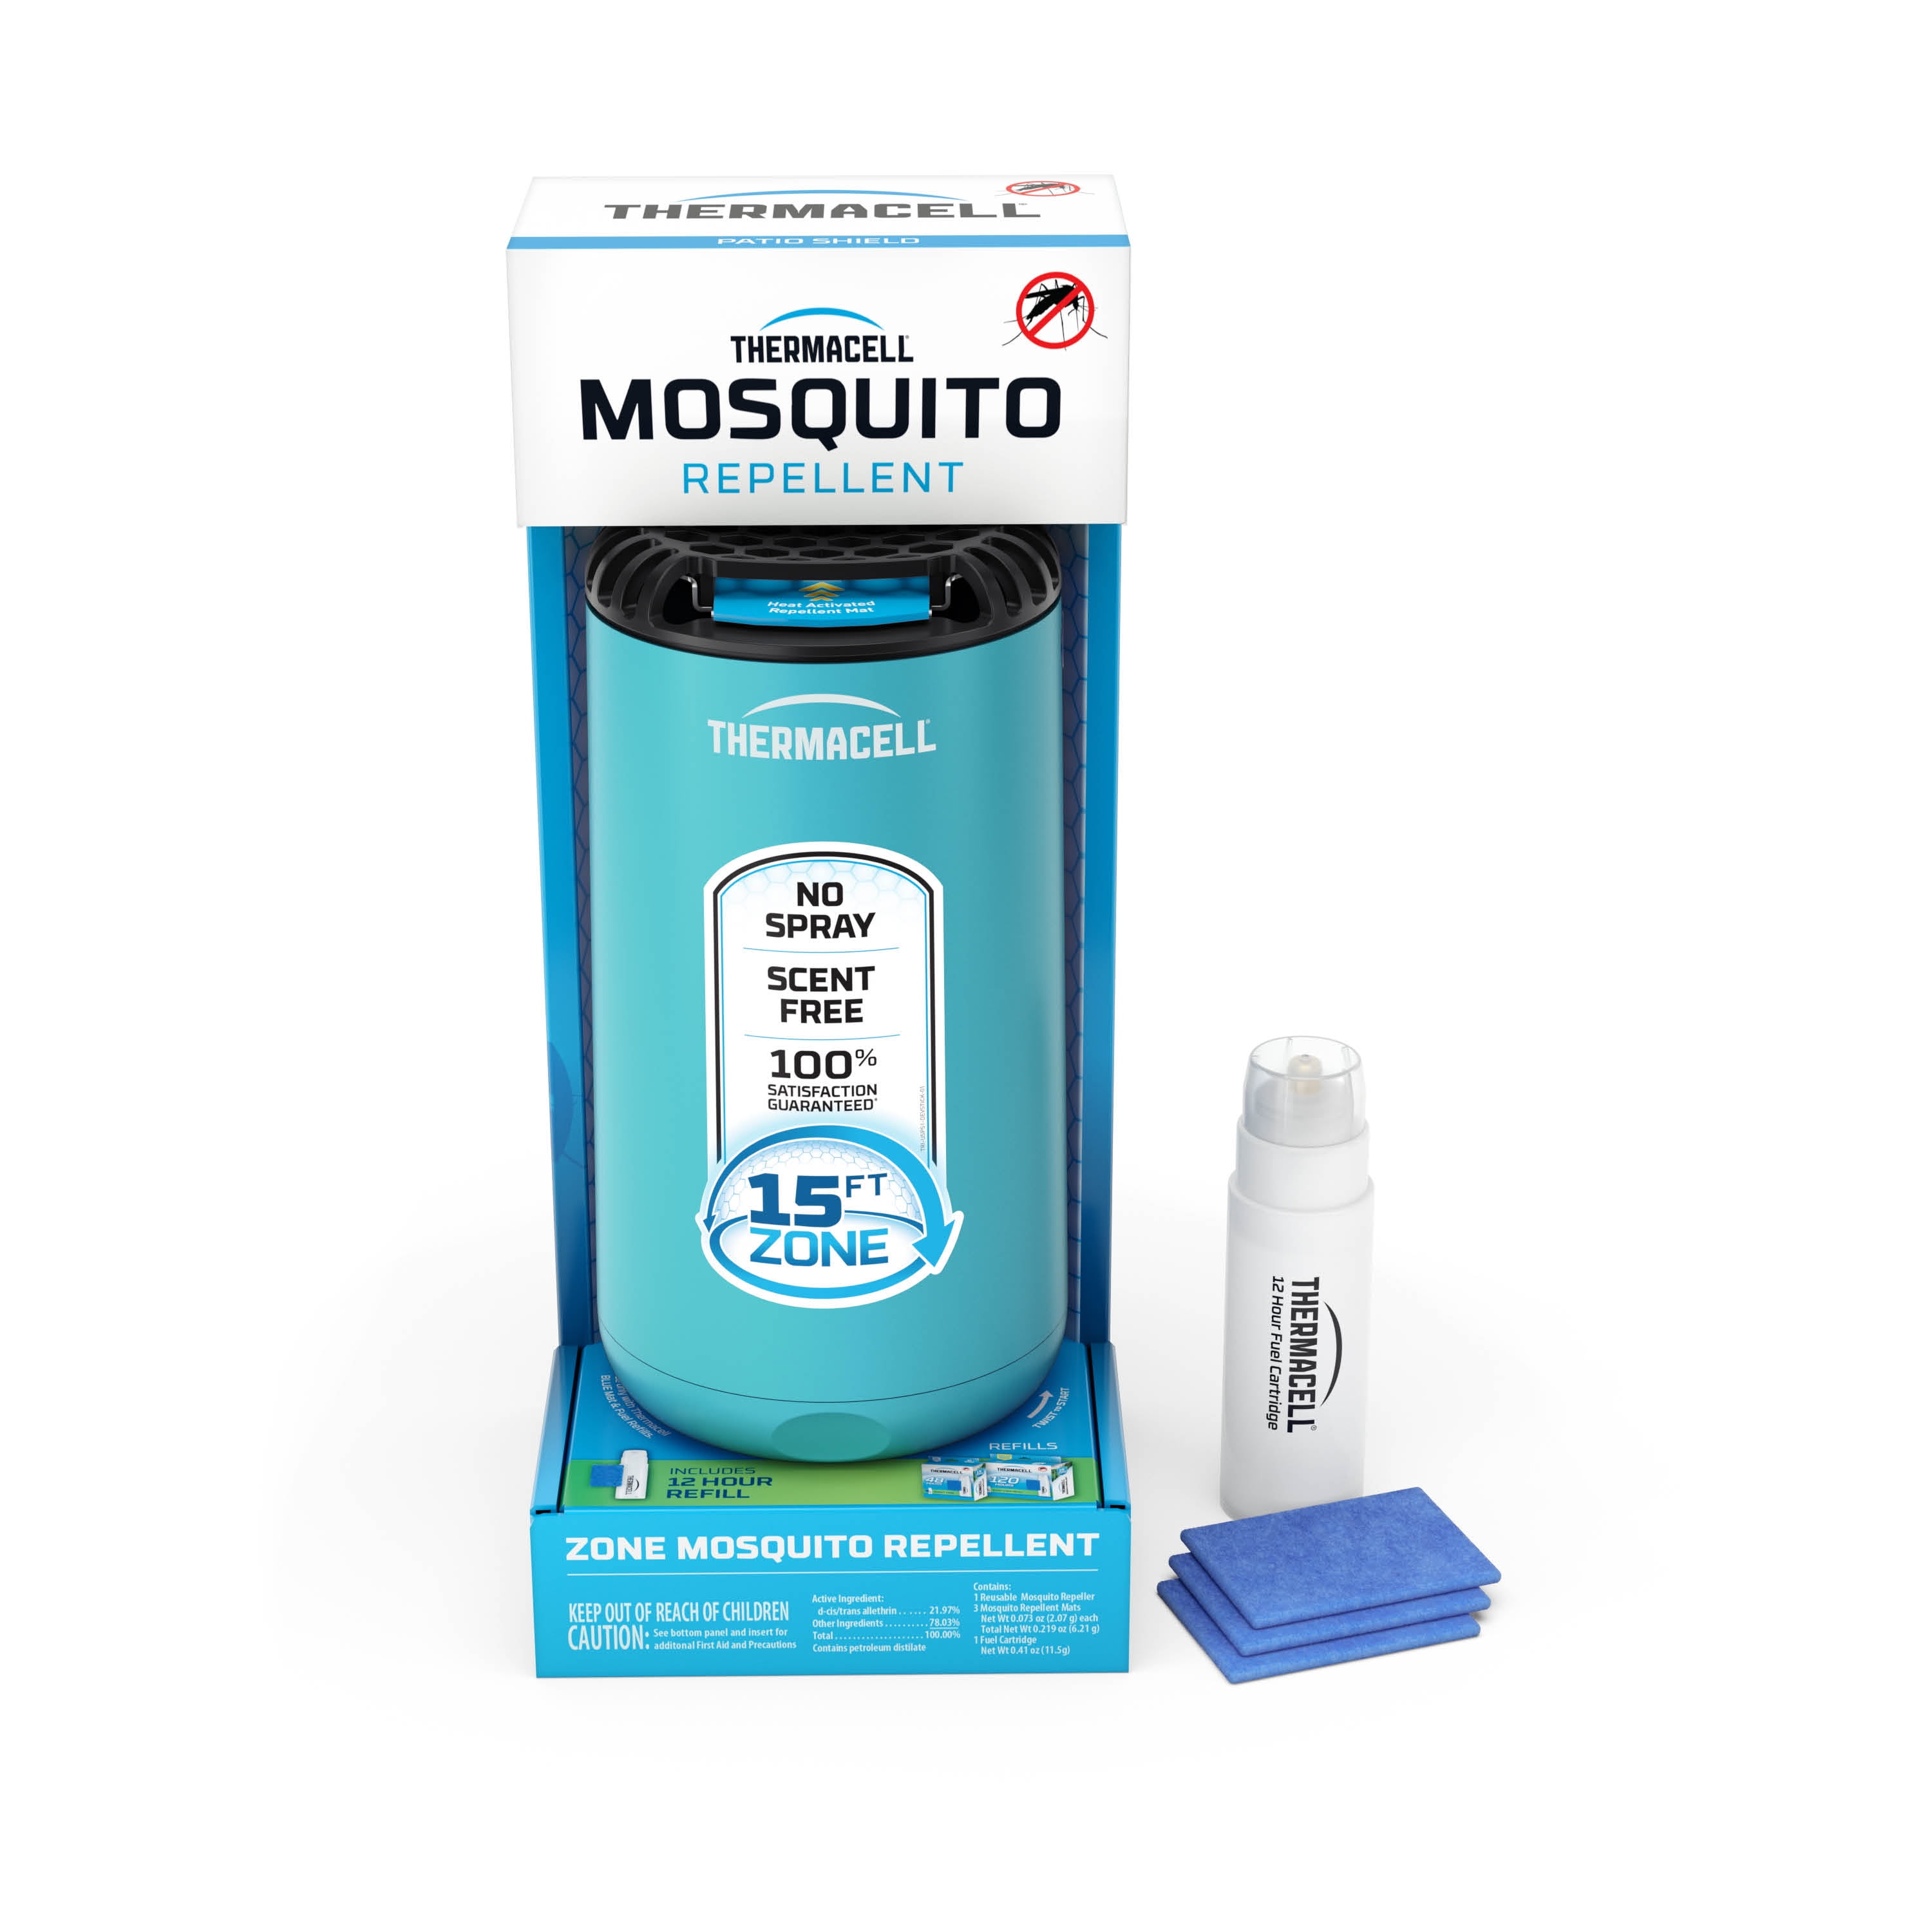 Thermacell Mr300 Portable Mosquito Repeller Contains Fuel Cartridge T4 for sale online 